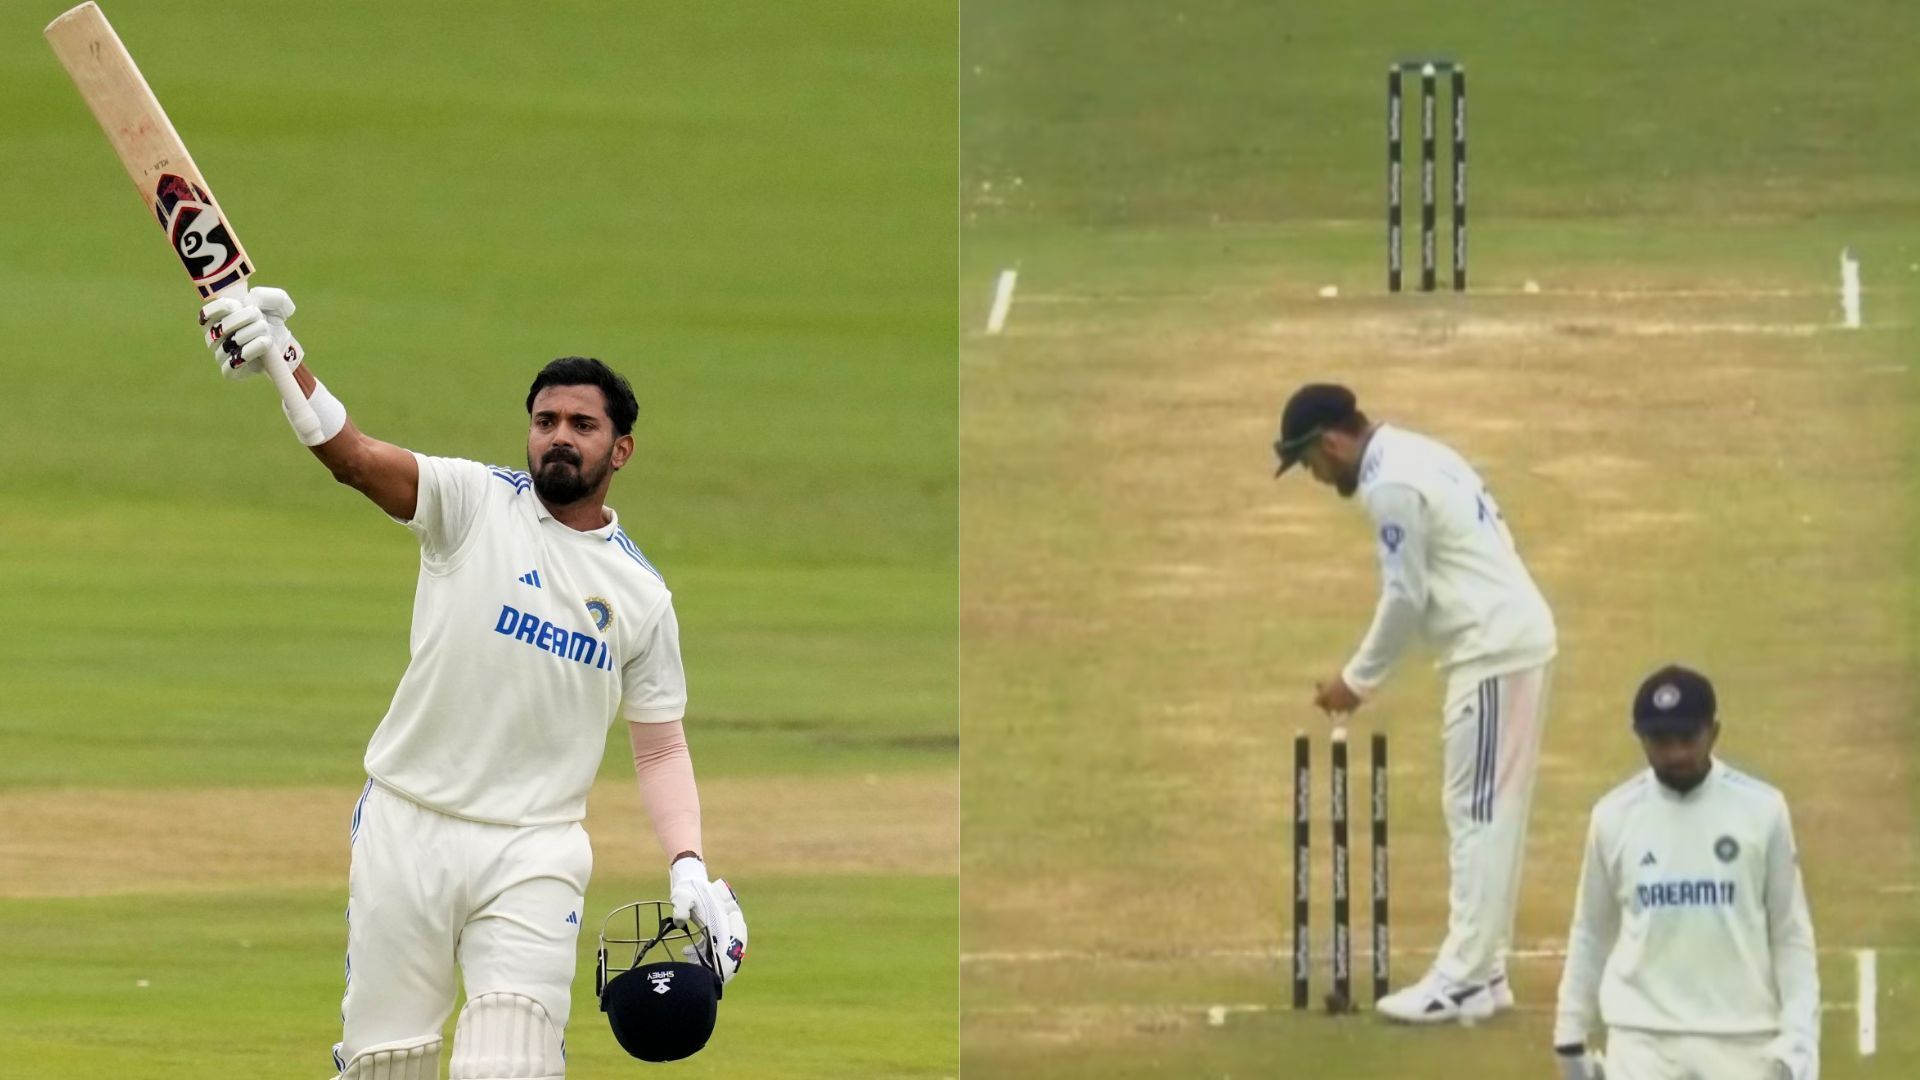 Some moments from the 1st Test that became viral on social media (P.C.:X)